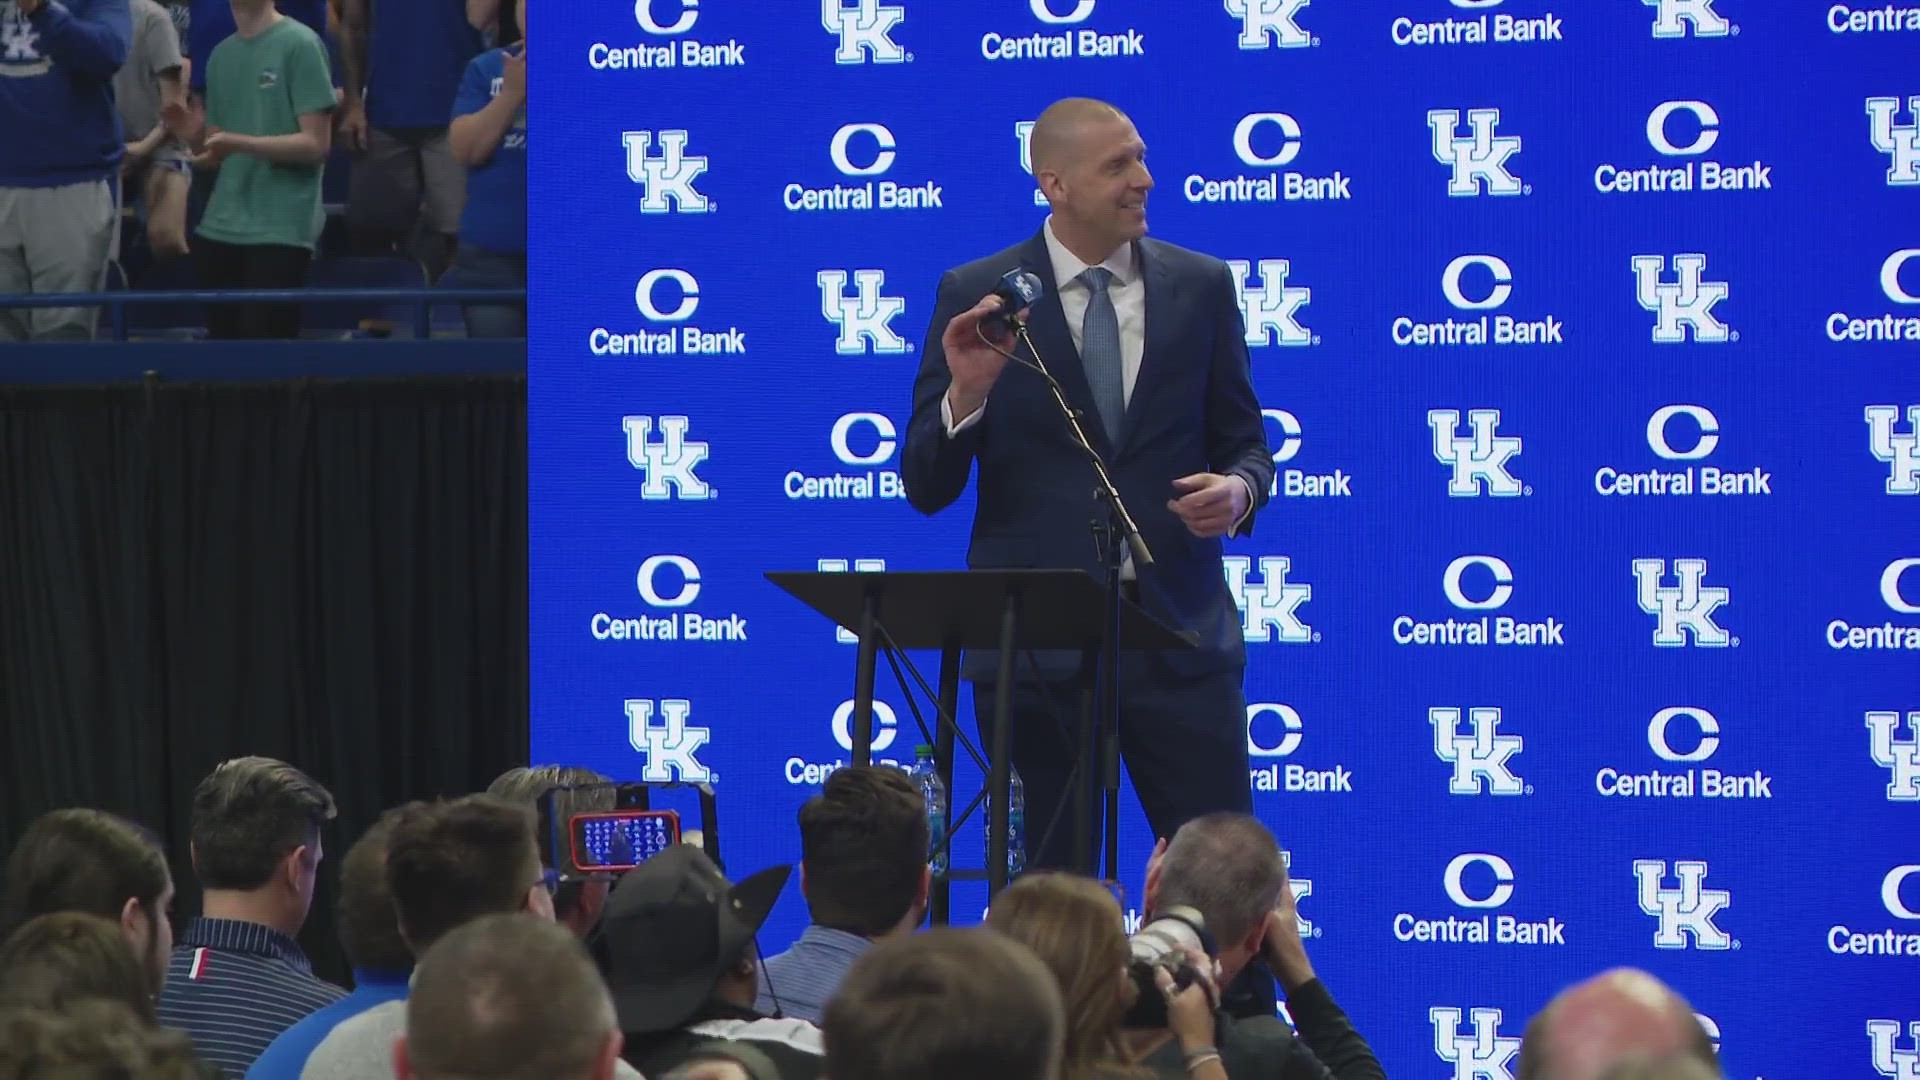 Rupp Arena was jam-packed on Sunday as excited fans got to meet the newest leader of Big Blue Nation.